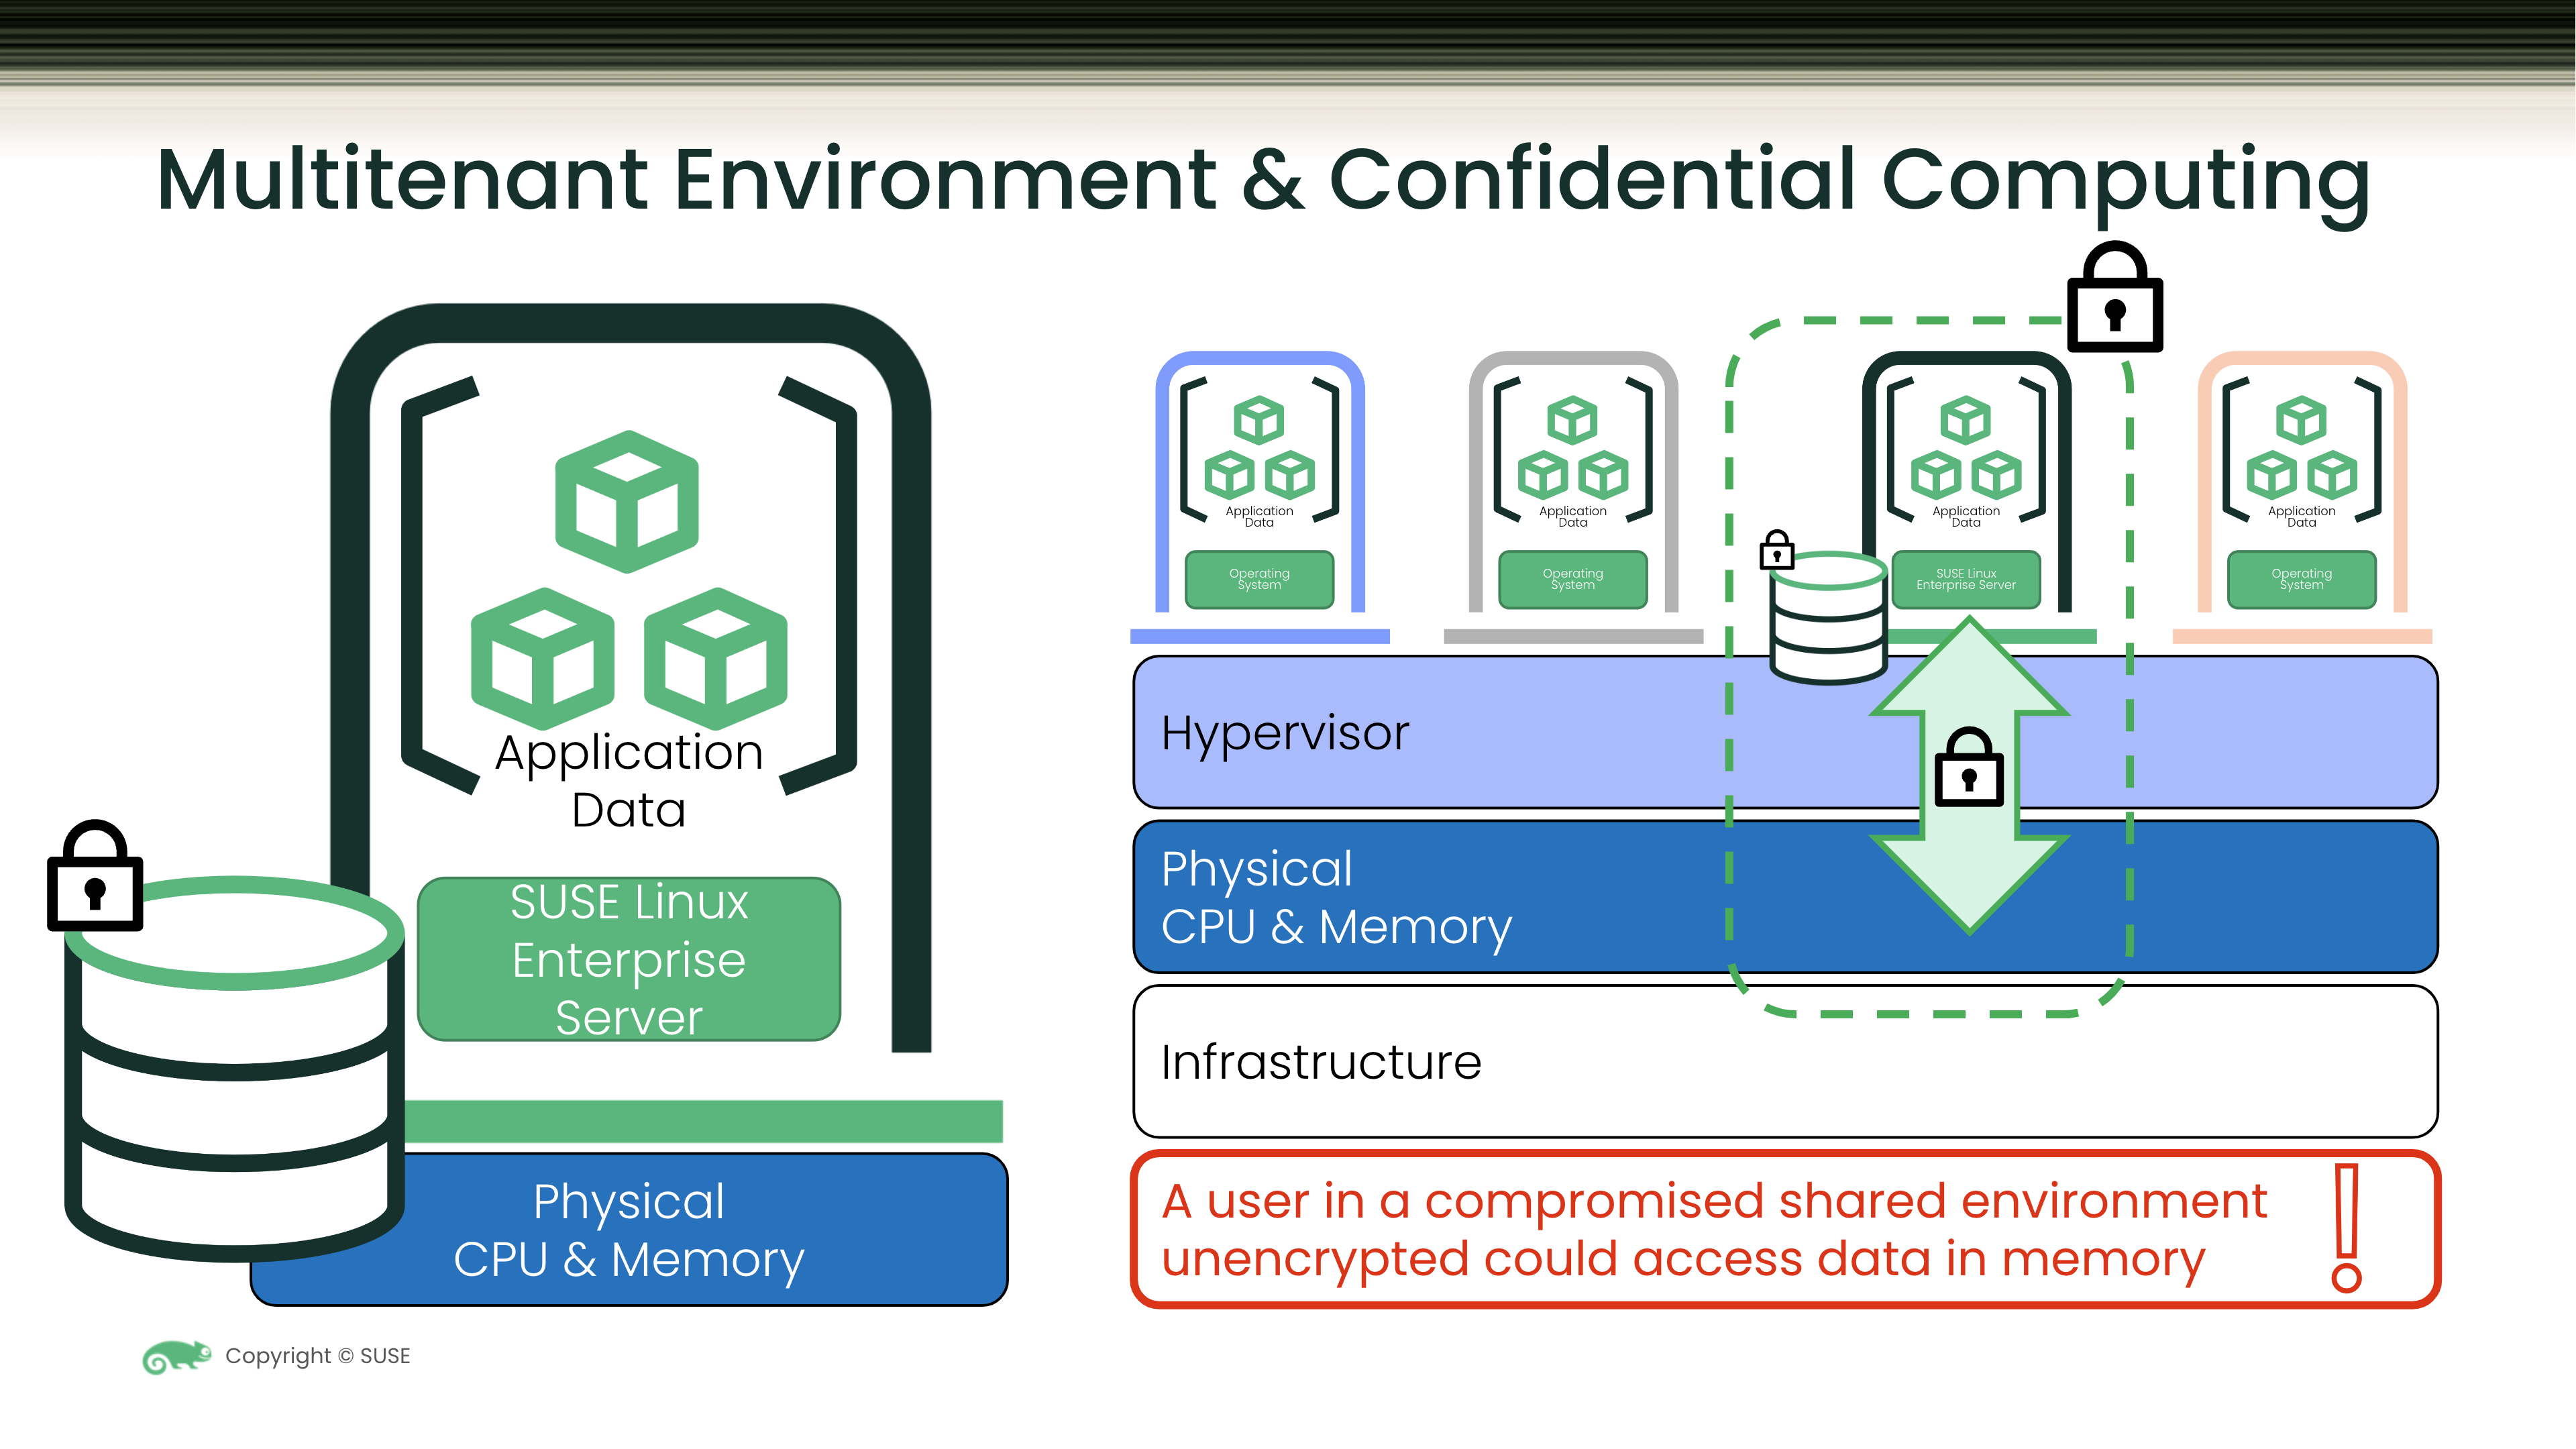 Confidential Computing Environment secures an enterprise workload based on SUSE Linux Enterprise Server running in a potentially compromised multi-tenant environment encrypting data in use.